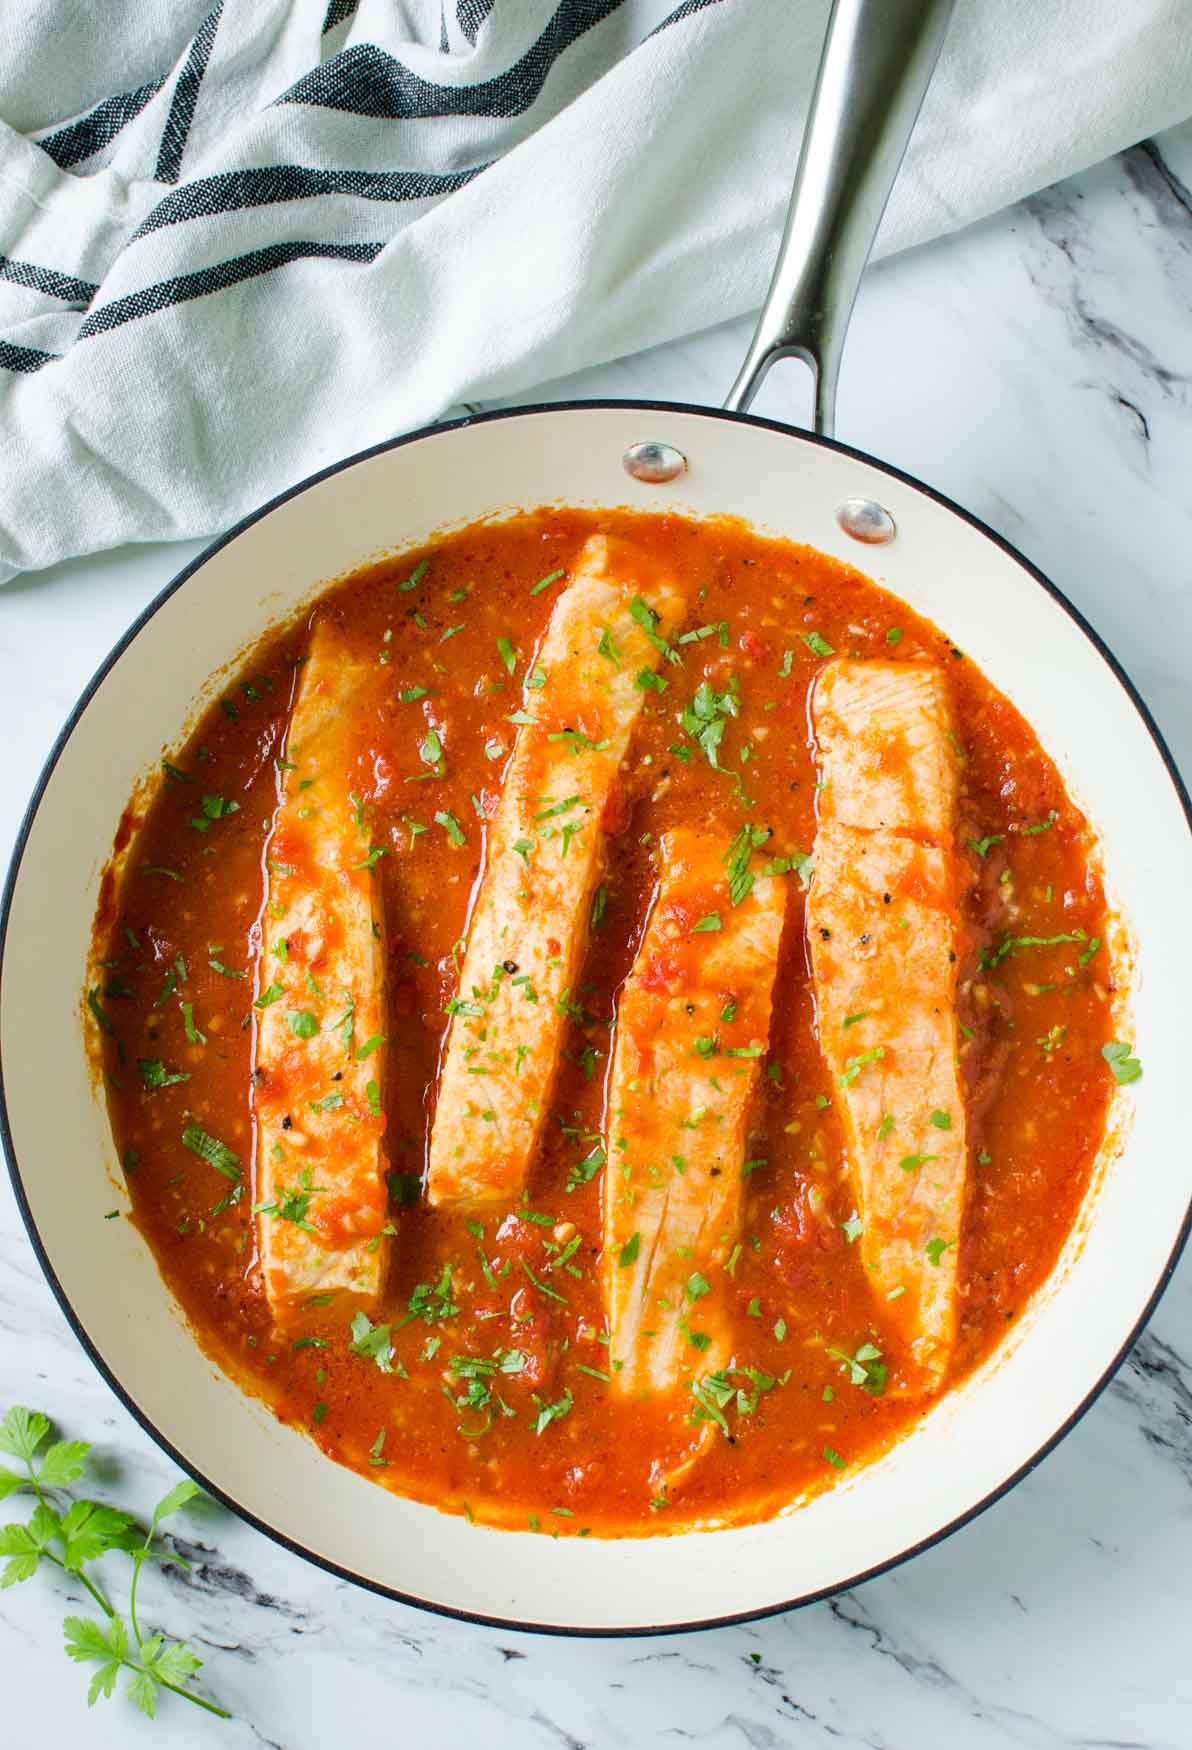 Garlic Salmon in Tomato Sauce by Watch What U Eat